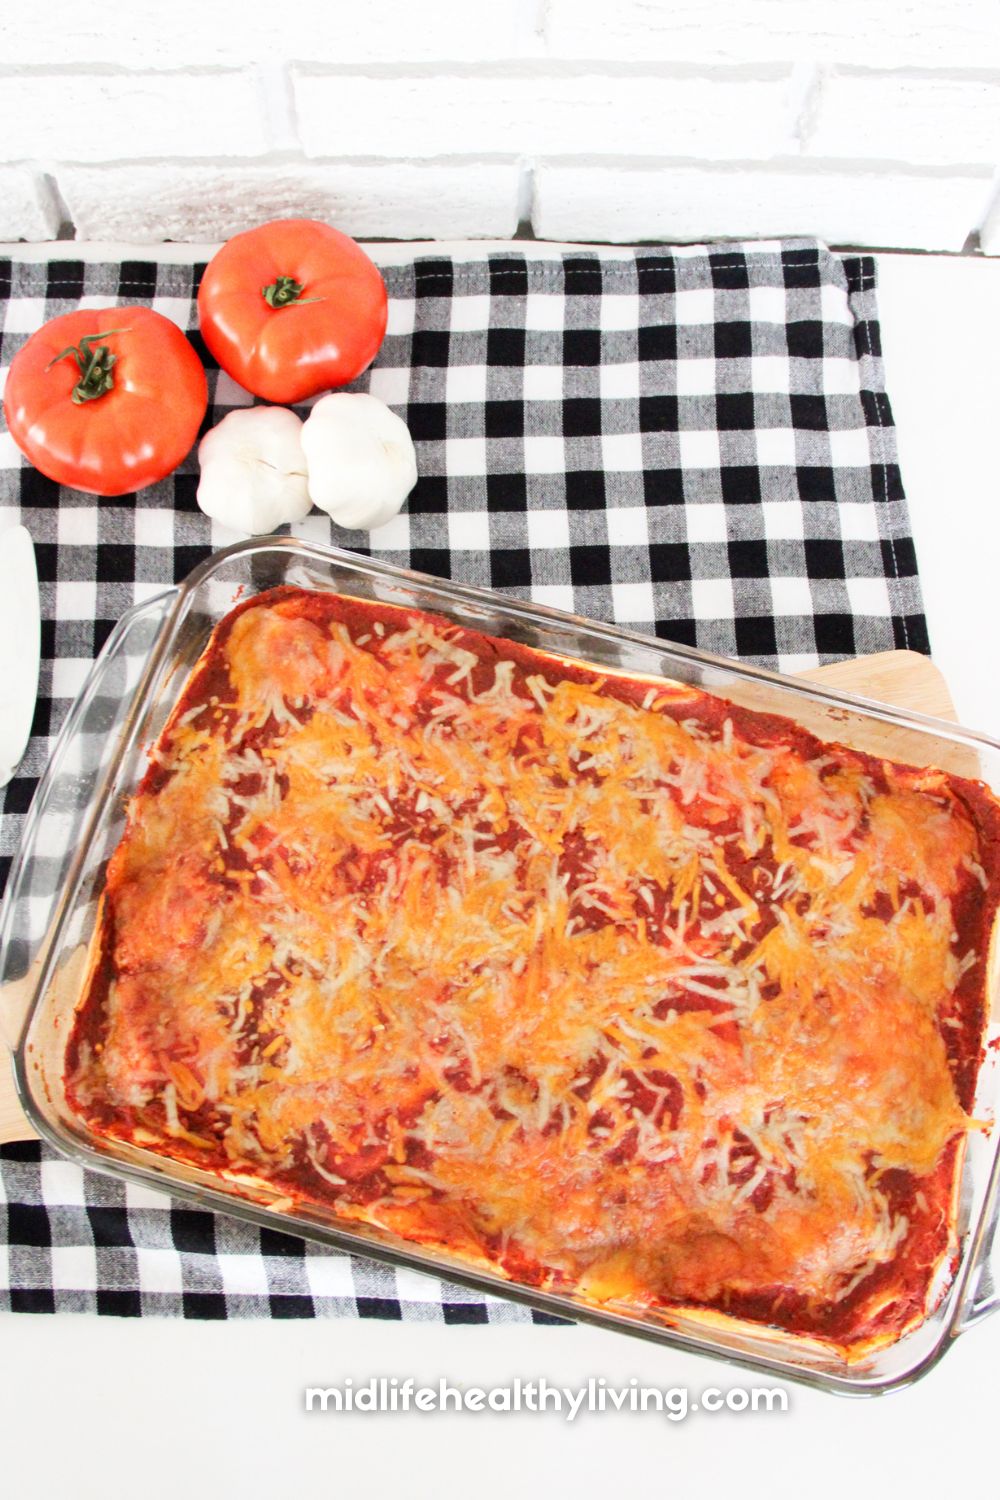 Weight Watchers Enchilada Casserole from above with a checkered place mat